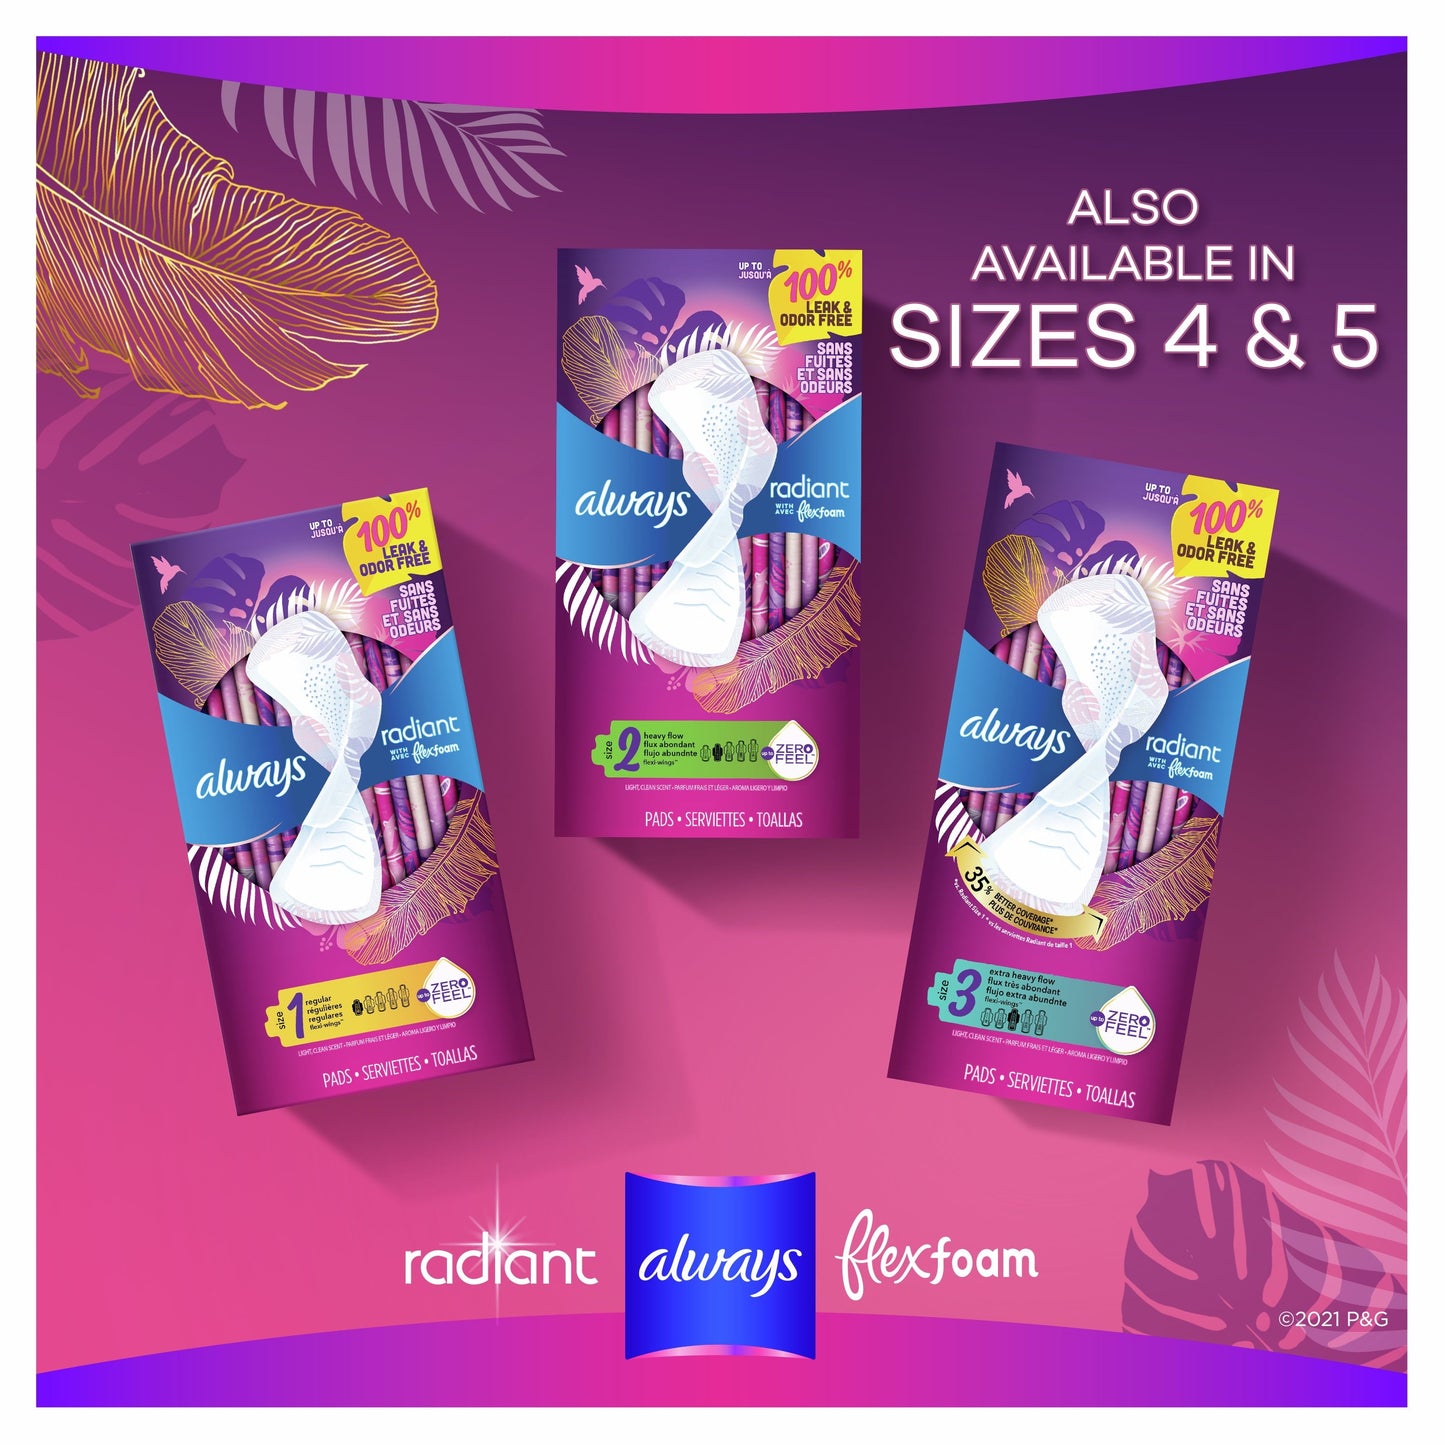 Always Radiant Feminine Pads with Wings, Size 1, Regular Absorbency, Scented, 30 Count